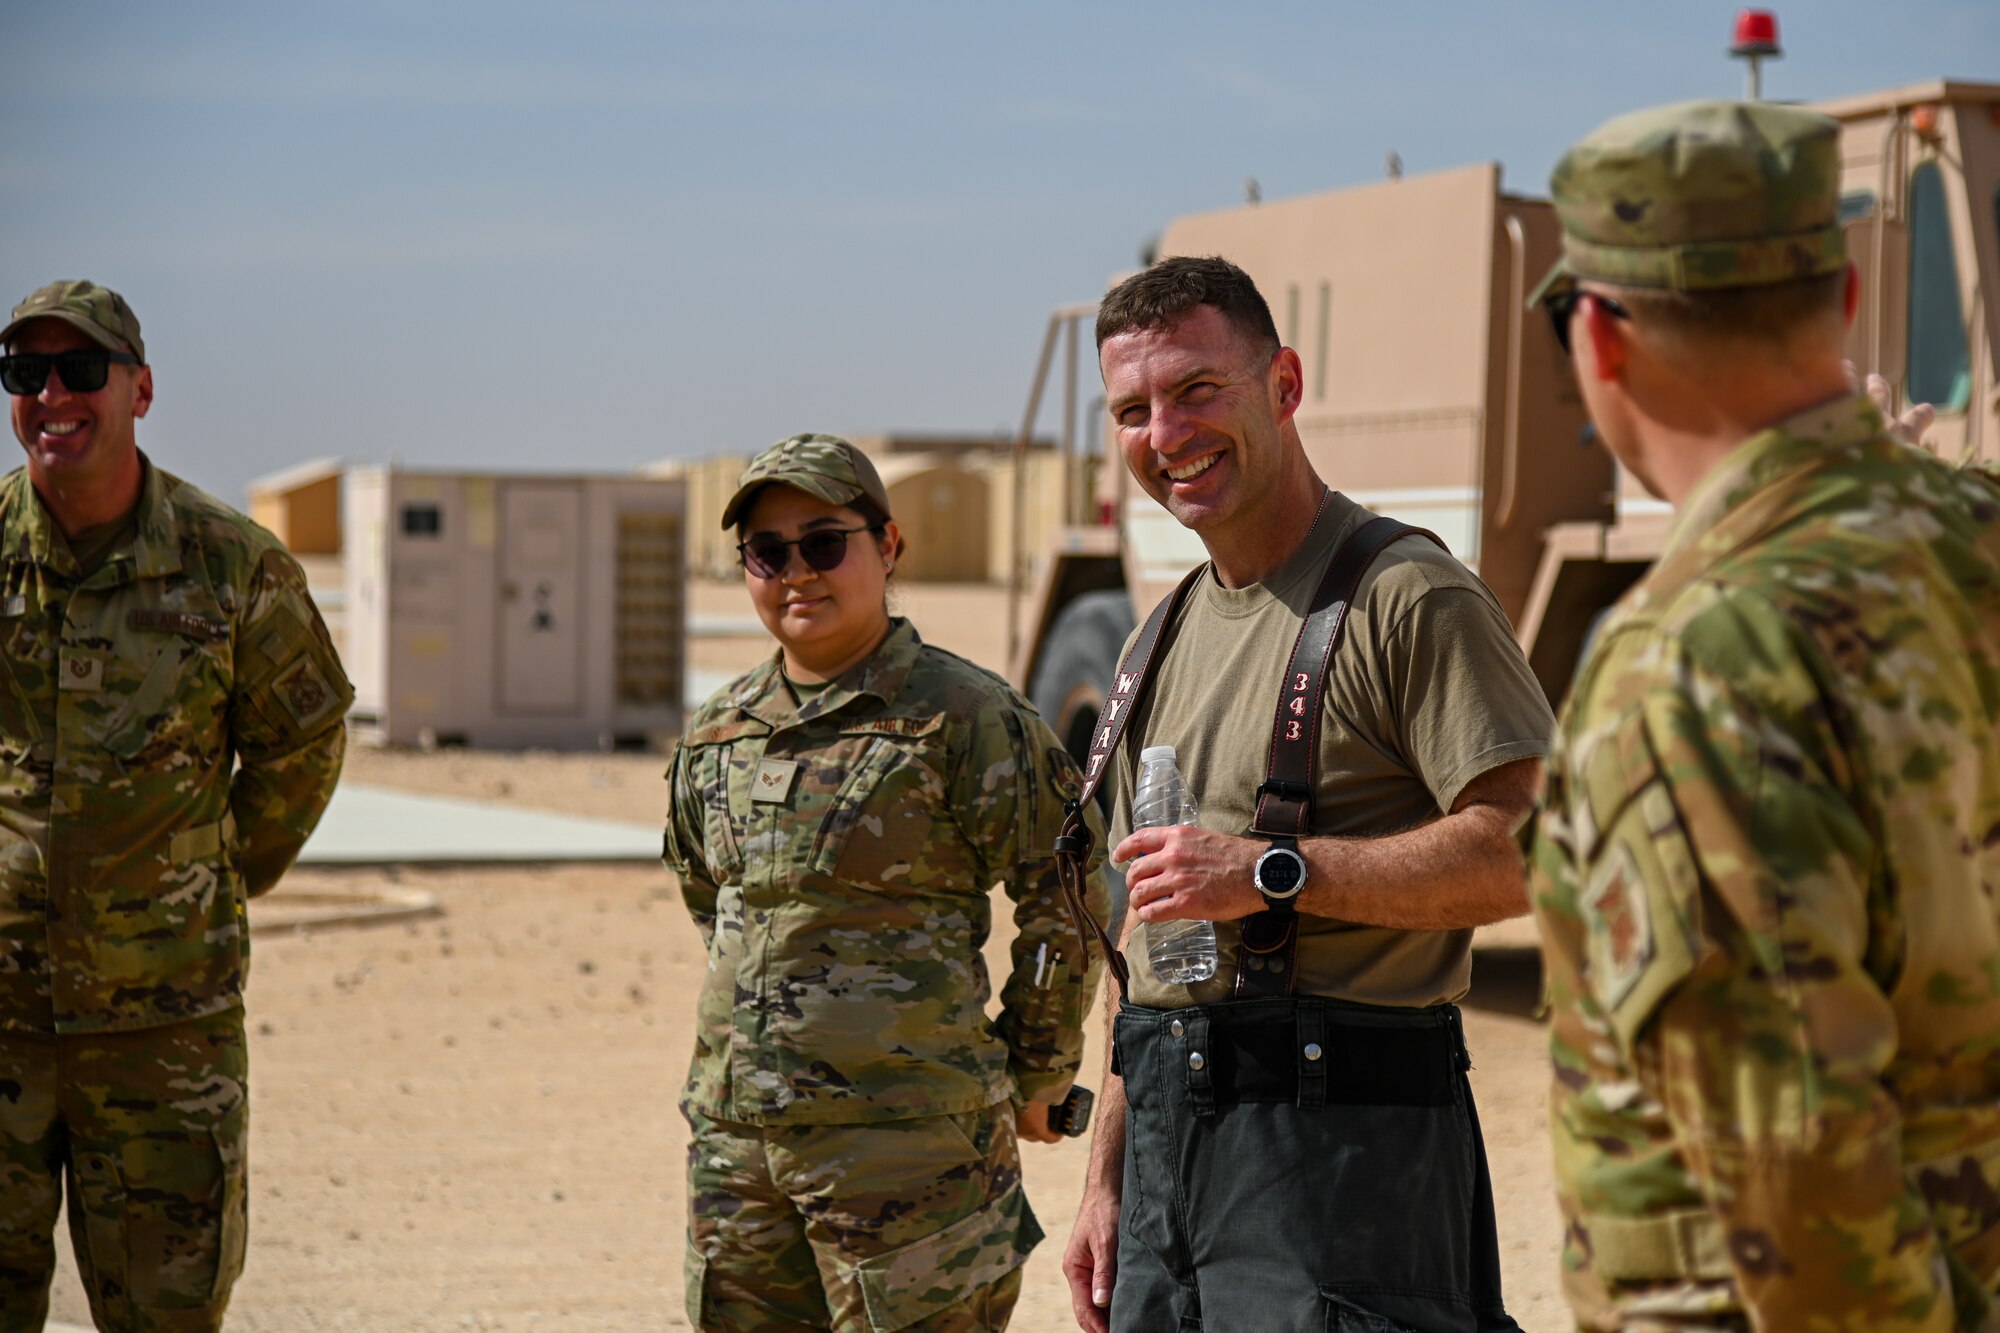 U.S. Air Force Brig. Gen. Robert Davis, 378th Air Expeditionary Wing commander, participates in a debrief alongside firefighters from the 378th Expeditionary Civil Engineer Squadron at Prince Sultan Air Base, Kingdom of Saudi Arabia, Dec. 9, 2021. Airmen from the 378th ECES regularly participate in contingency readiness development to ensure that they are always prepared to answer the call. (U.S. Air Force photo by Staff Sgt. Christina Graves)